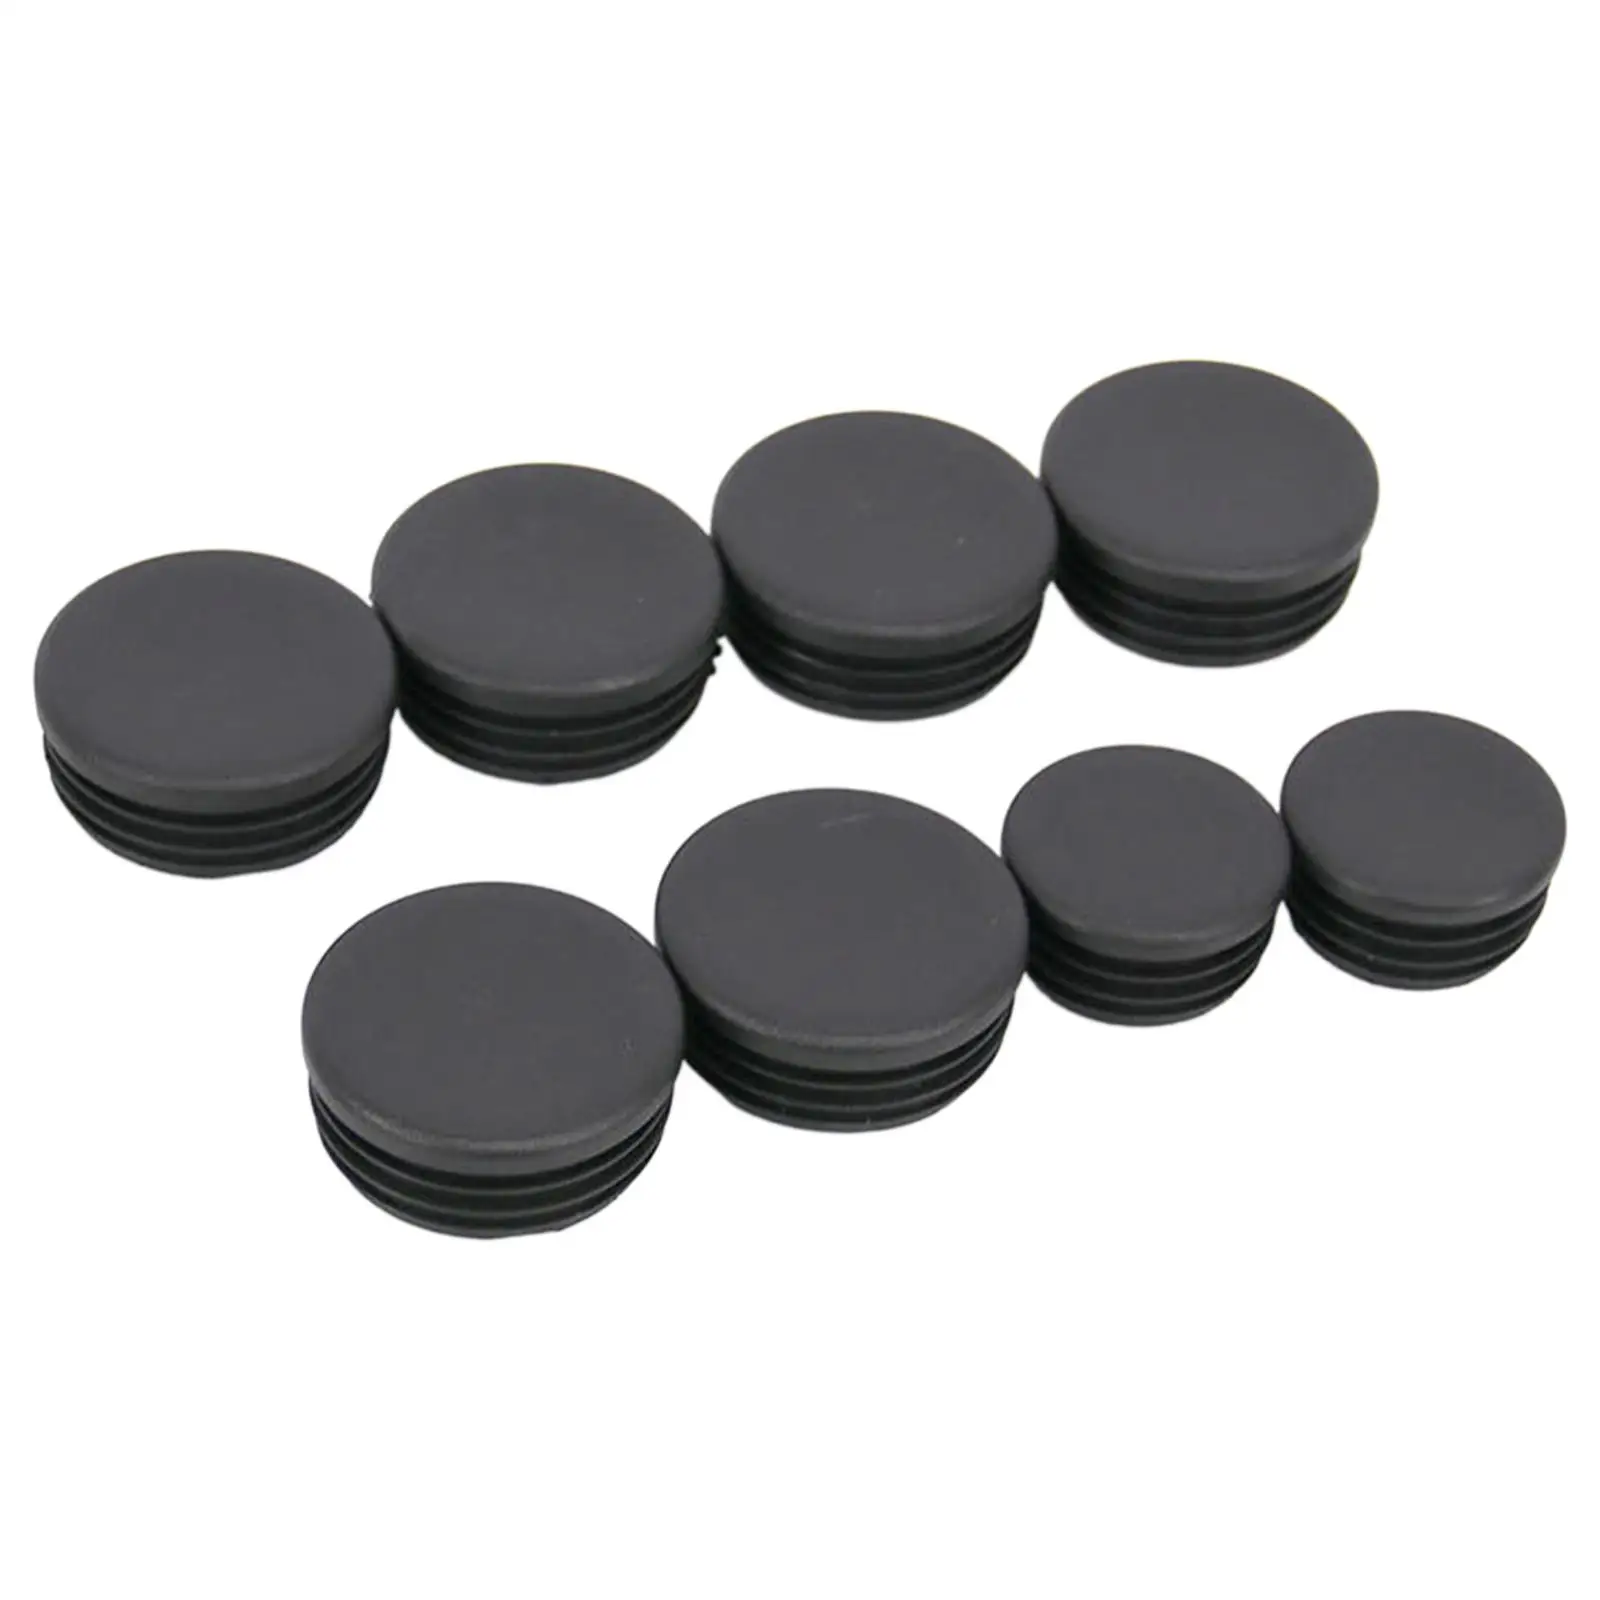 8 Pieces Waterproof Chassis Plug Covers ,Vehicle Parts ,Accessories Black Dustproof Plug Hole Covers for   Jb64 Jb74 20